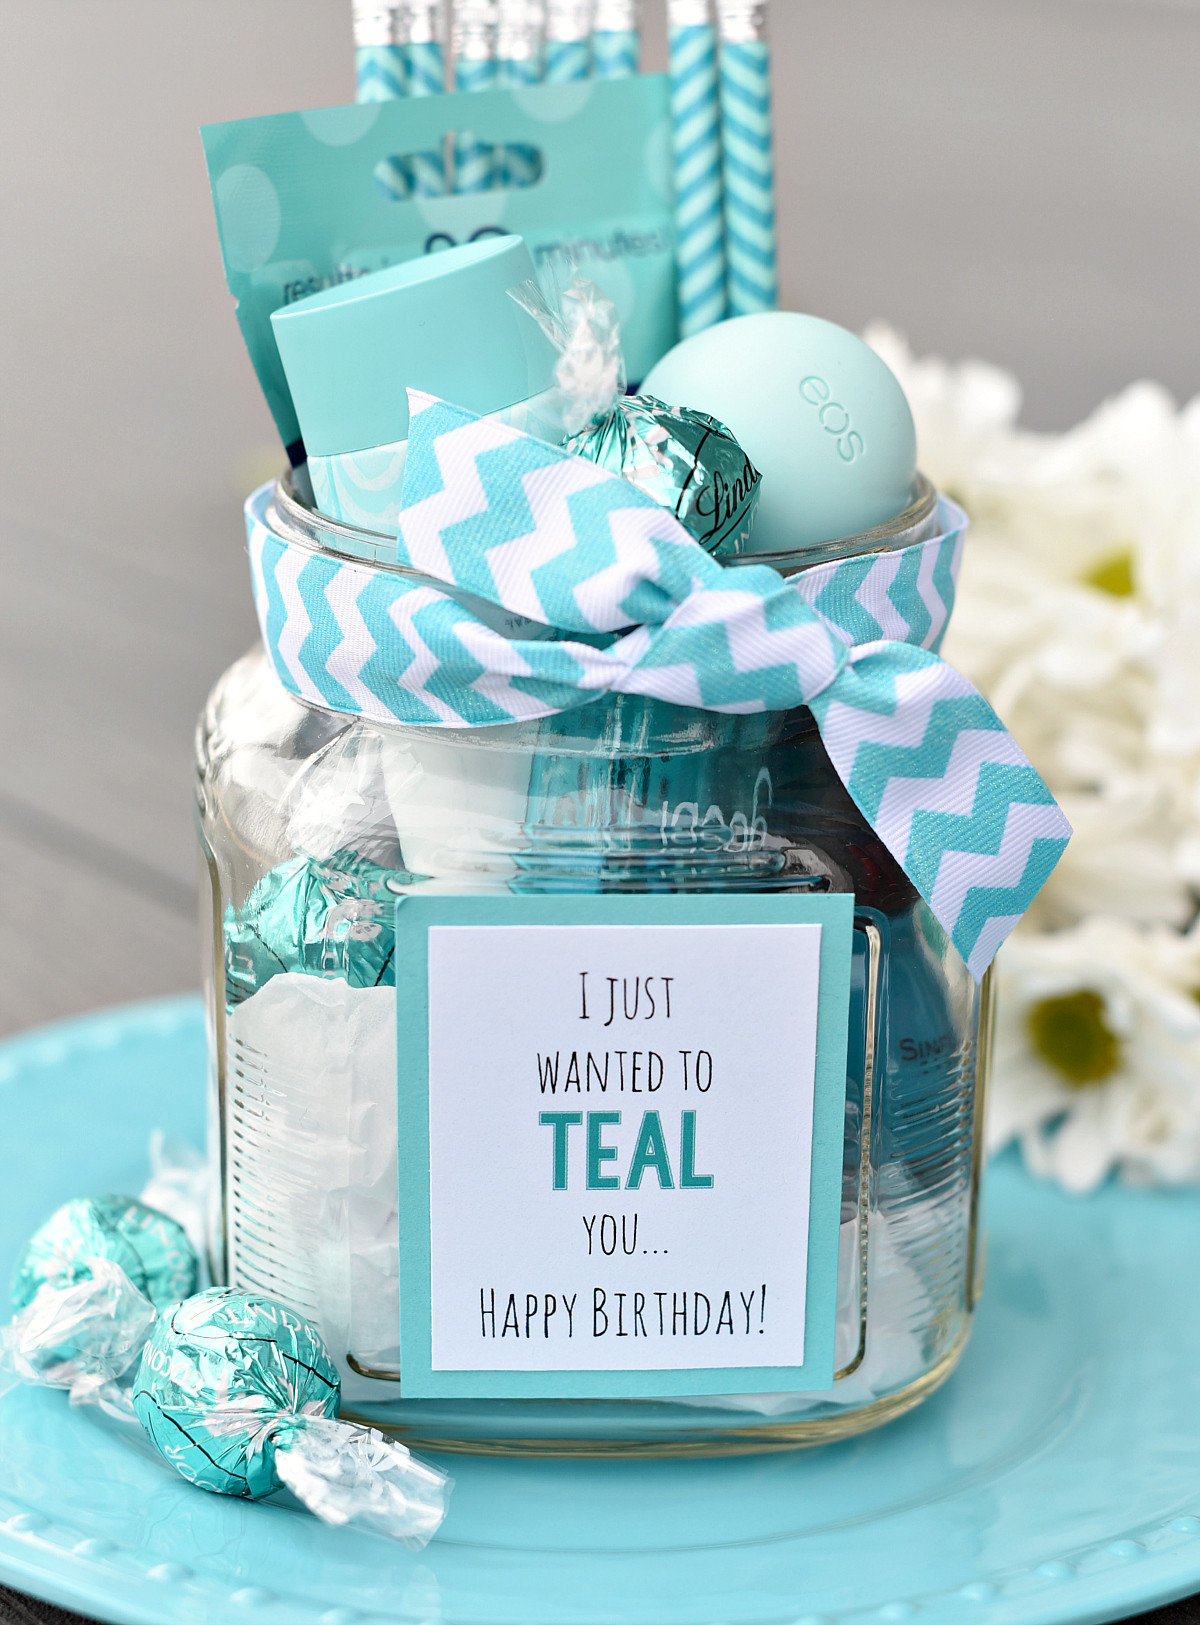 Fun Birthday Gifts For Her
 Teal Birthday Gift Idea for Friends – Fun Squared